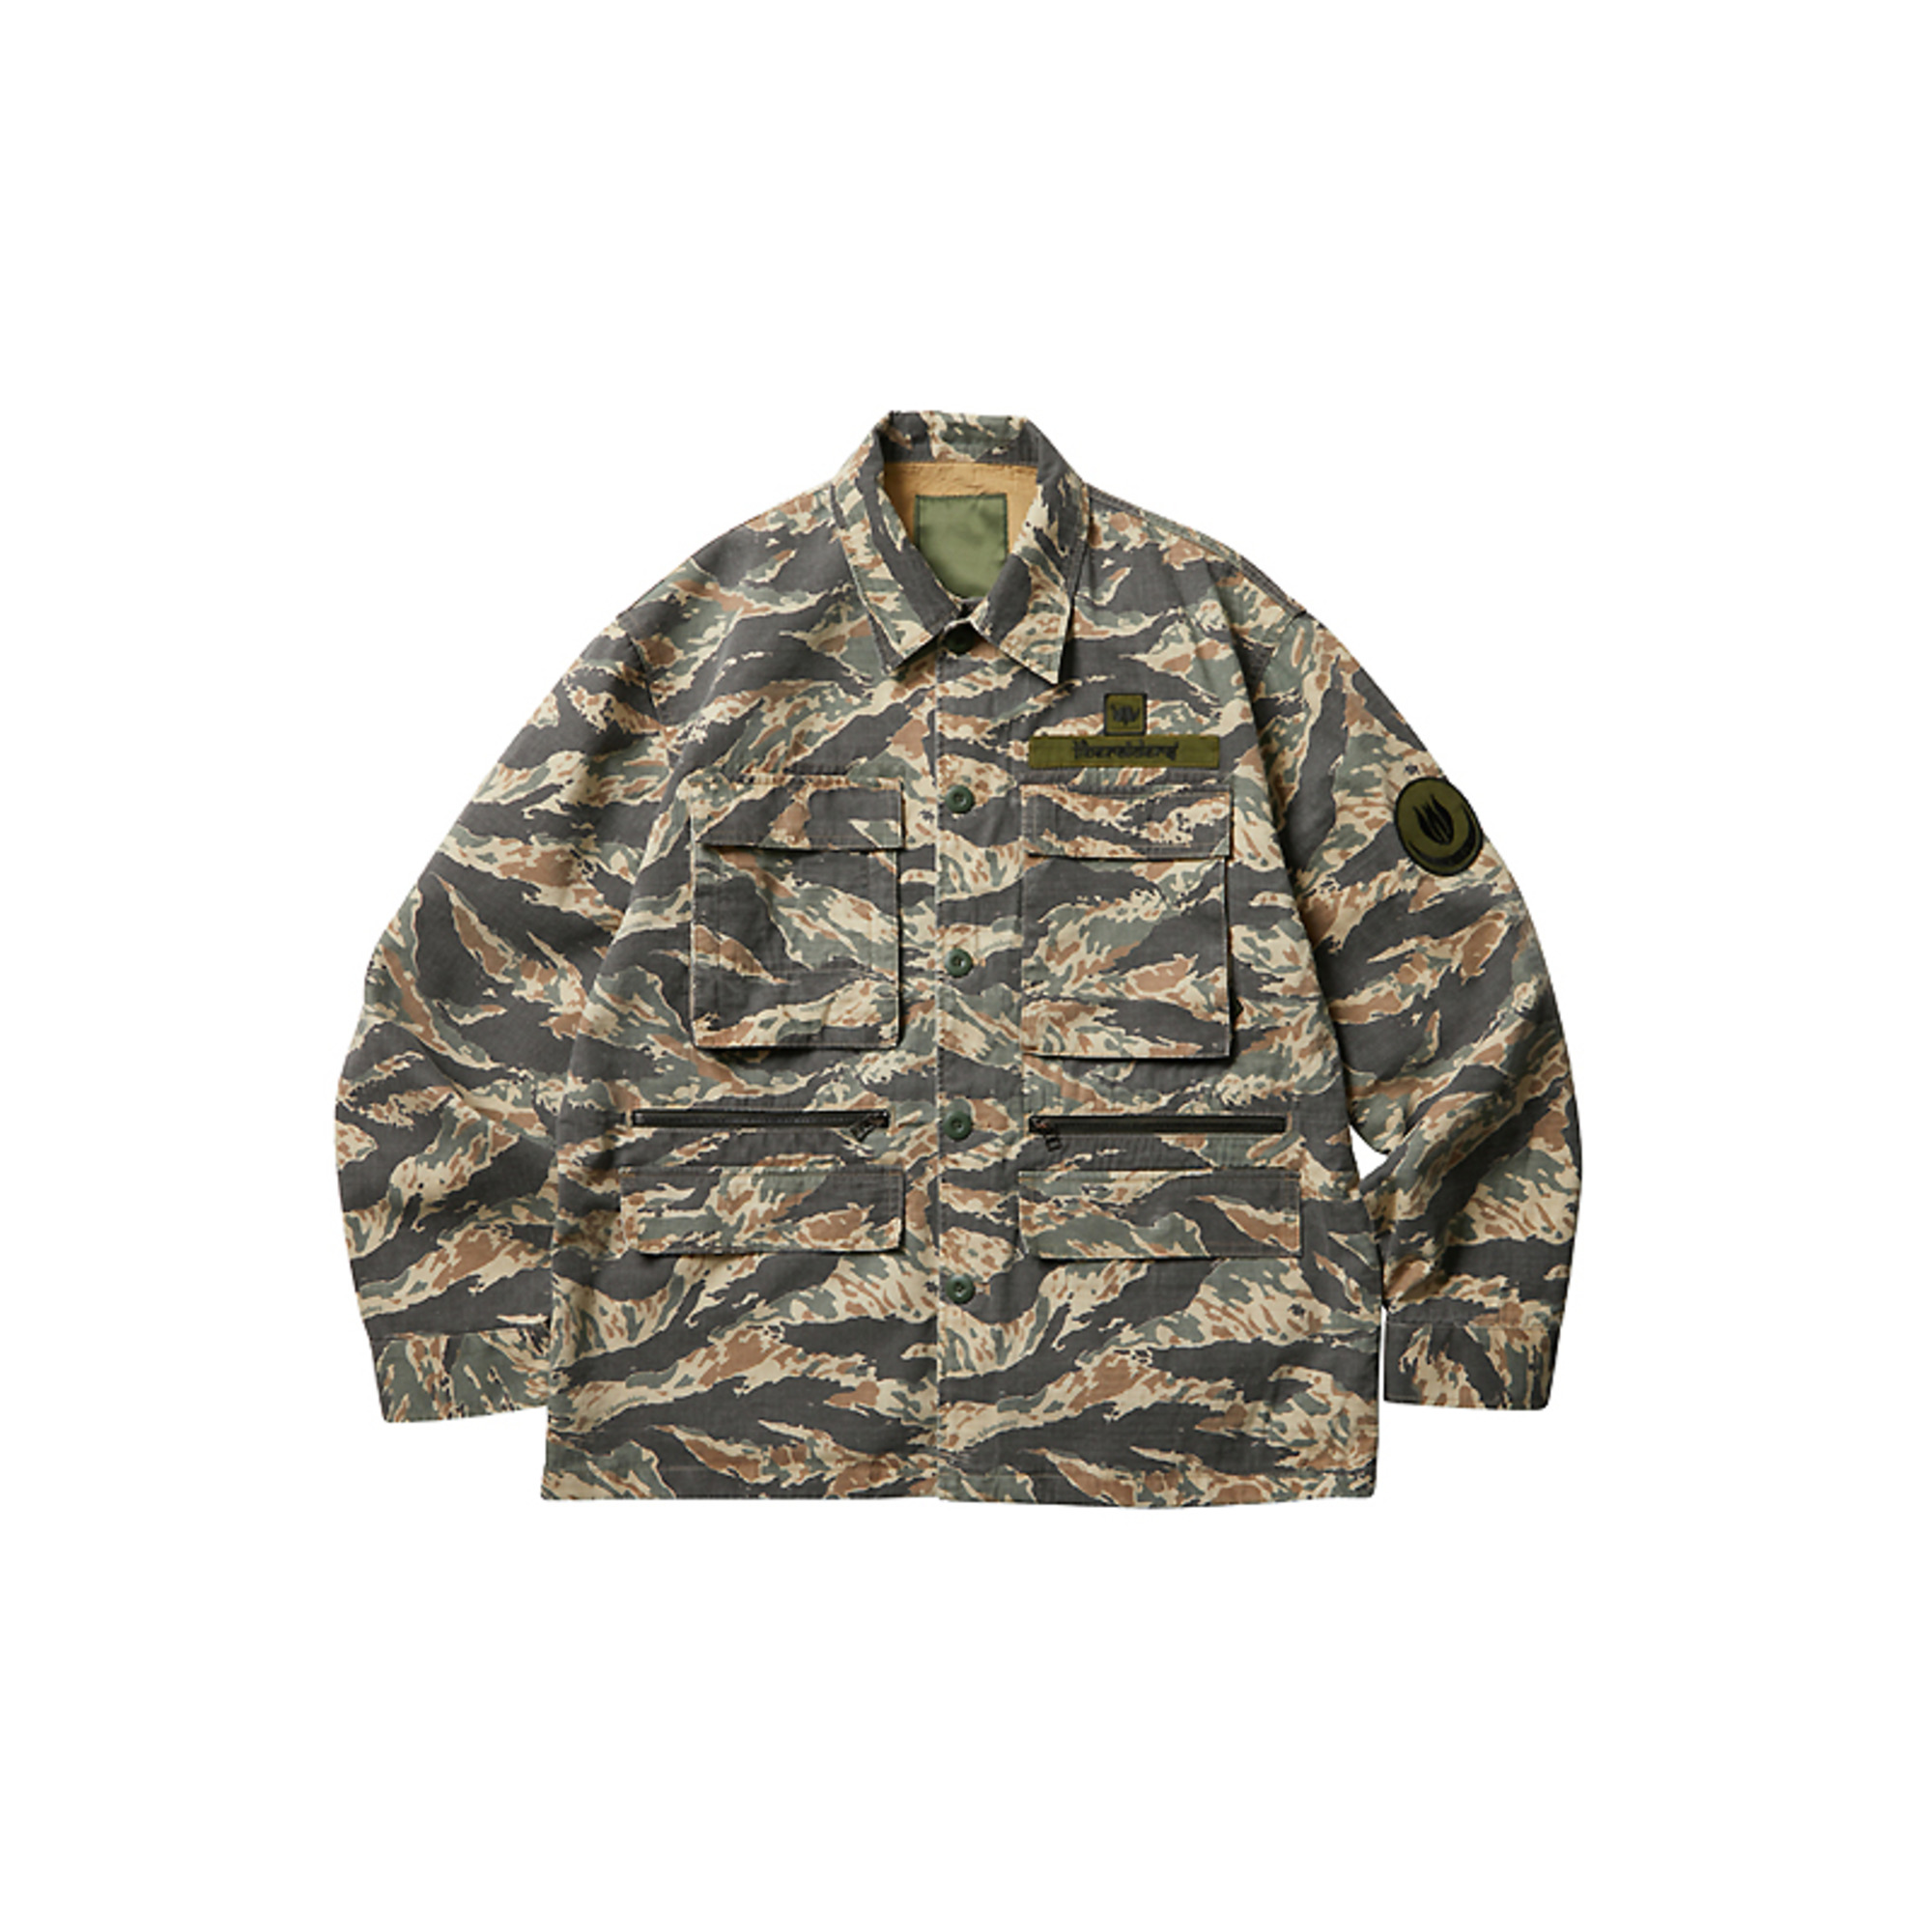 NEW Camouflage Patched Jacket – Proclaim Your Pride!